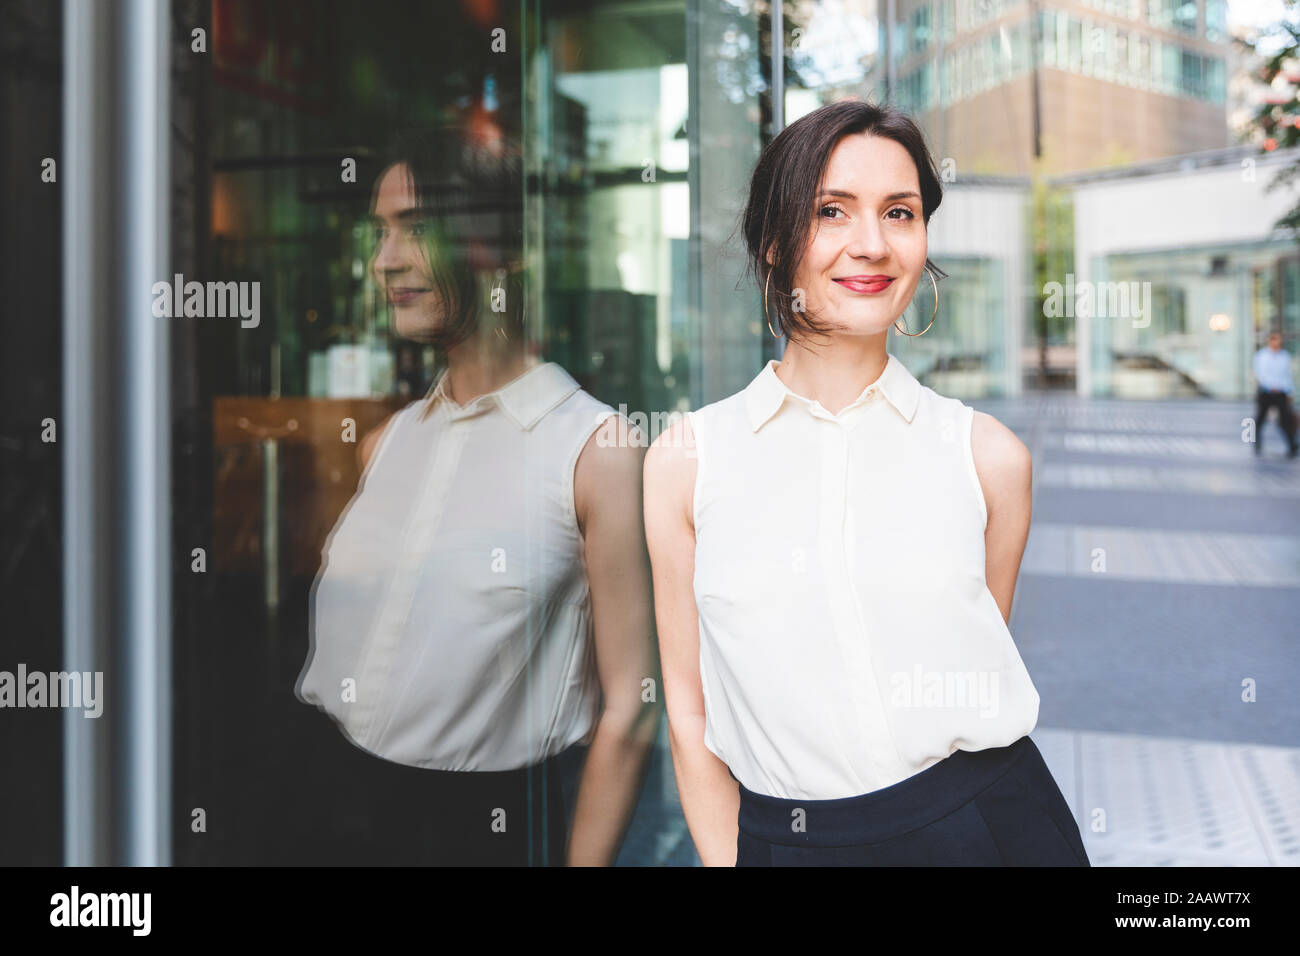 Portrait of young businesswoman reflected in glass, Berlin, Allemagne Banque D'Images